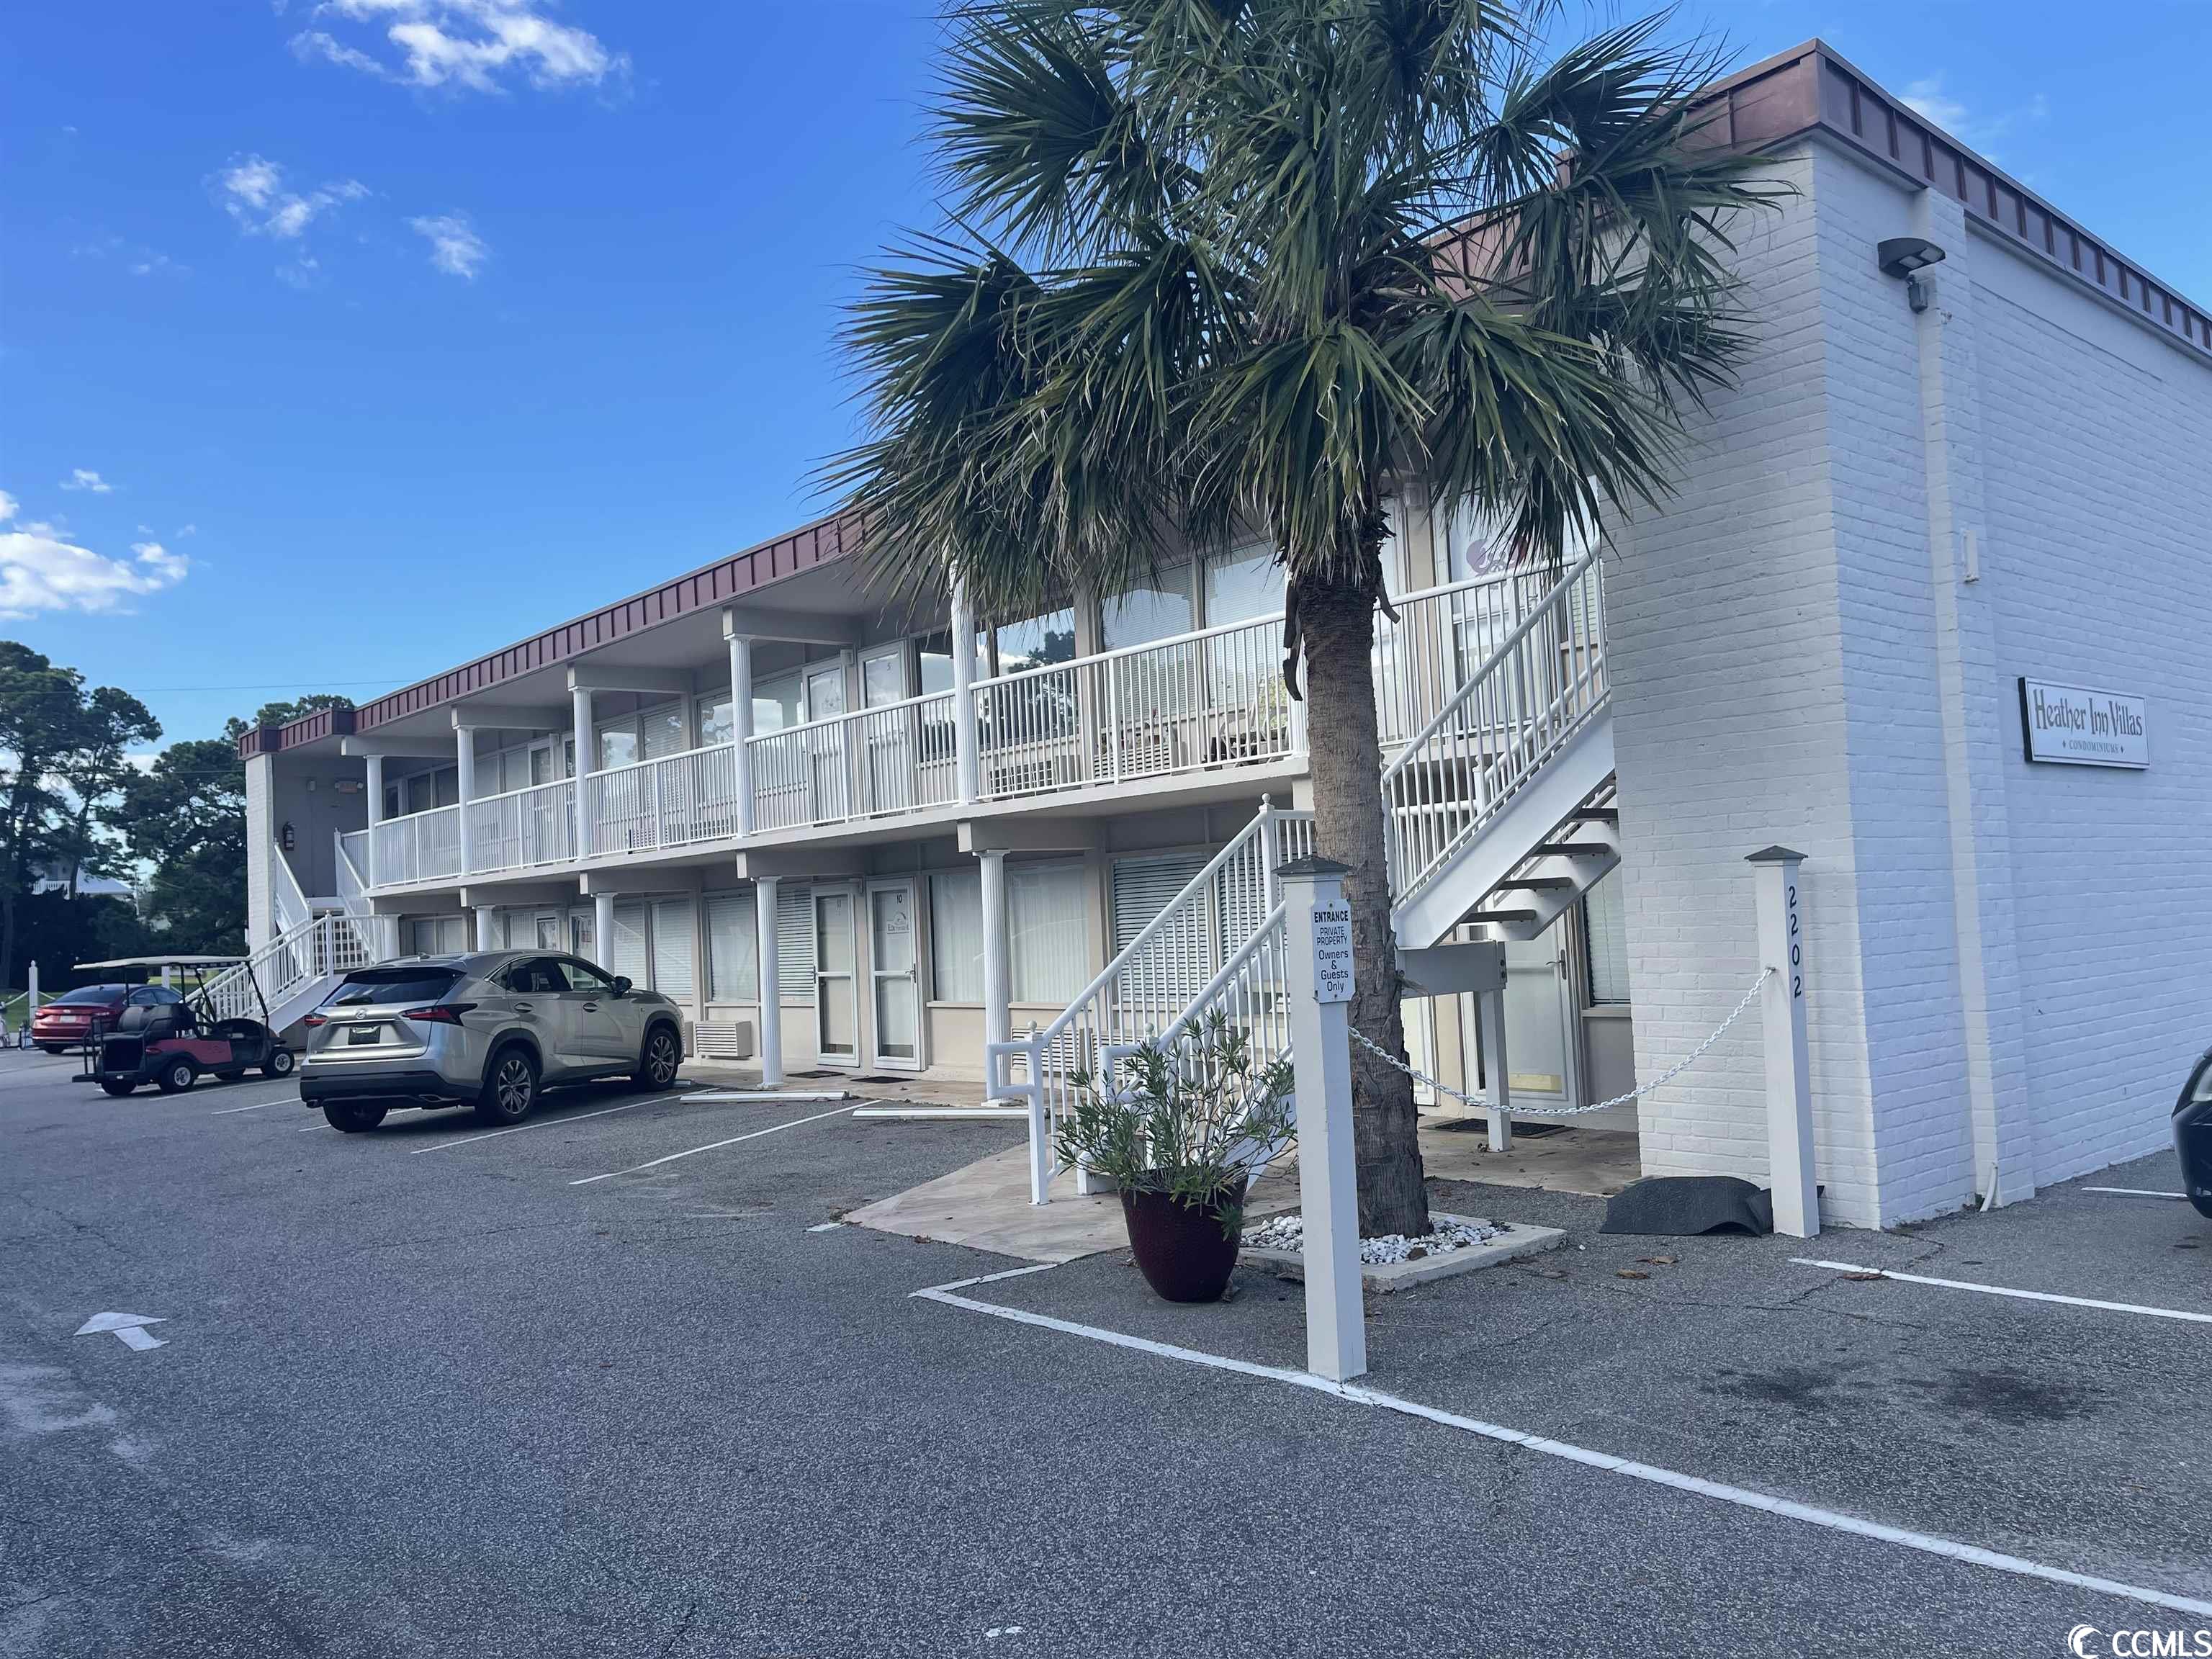 2202 S Perrin Dr. UNIT #8 North Myrtle Beach, SC 29582